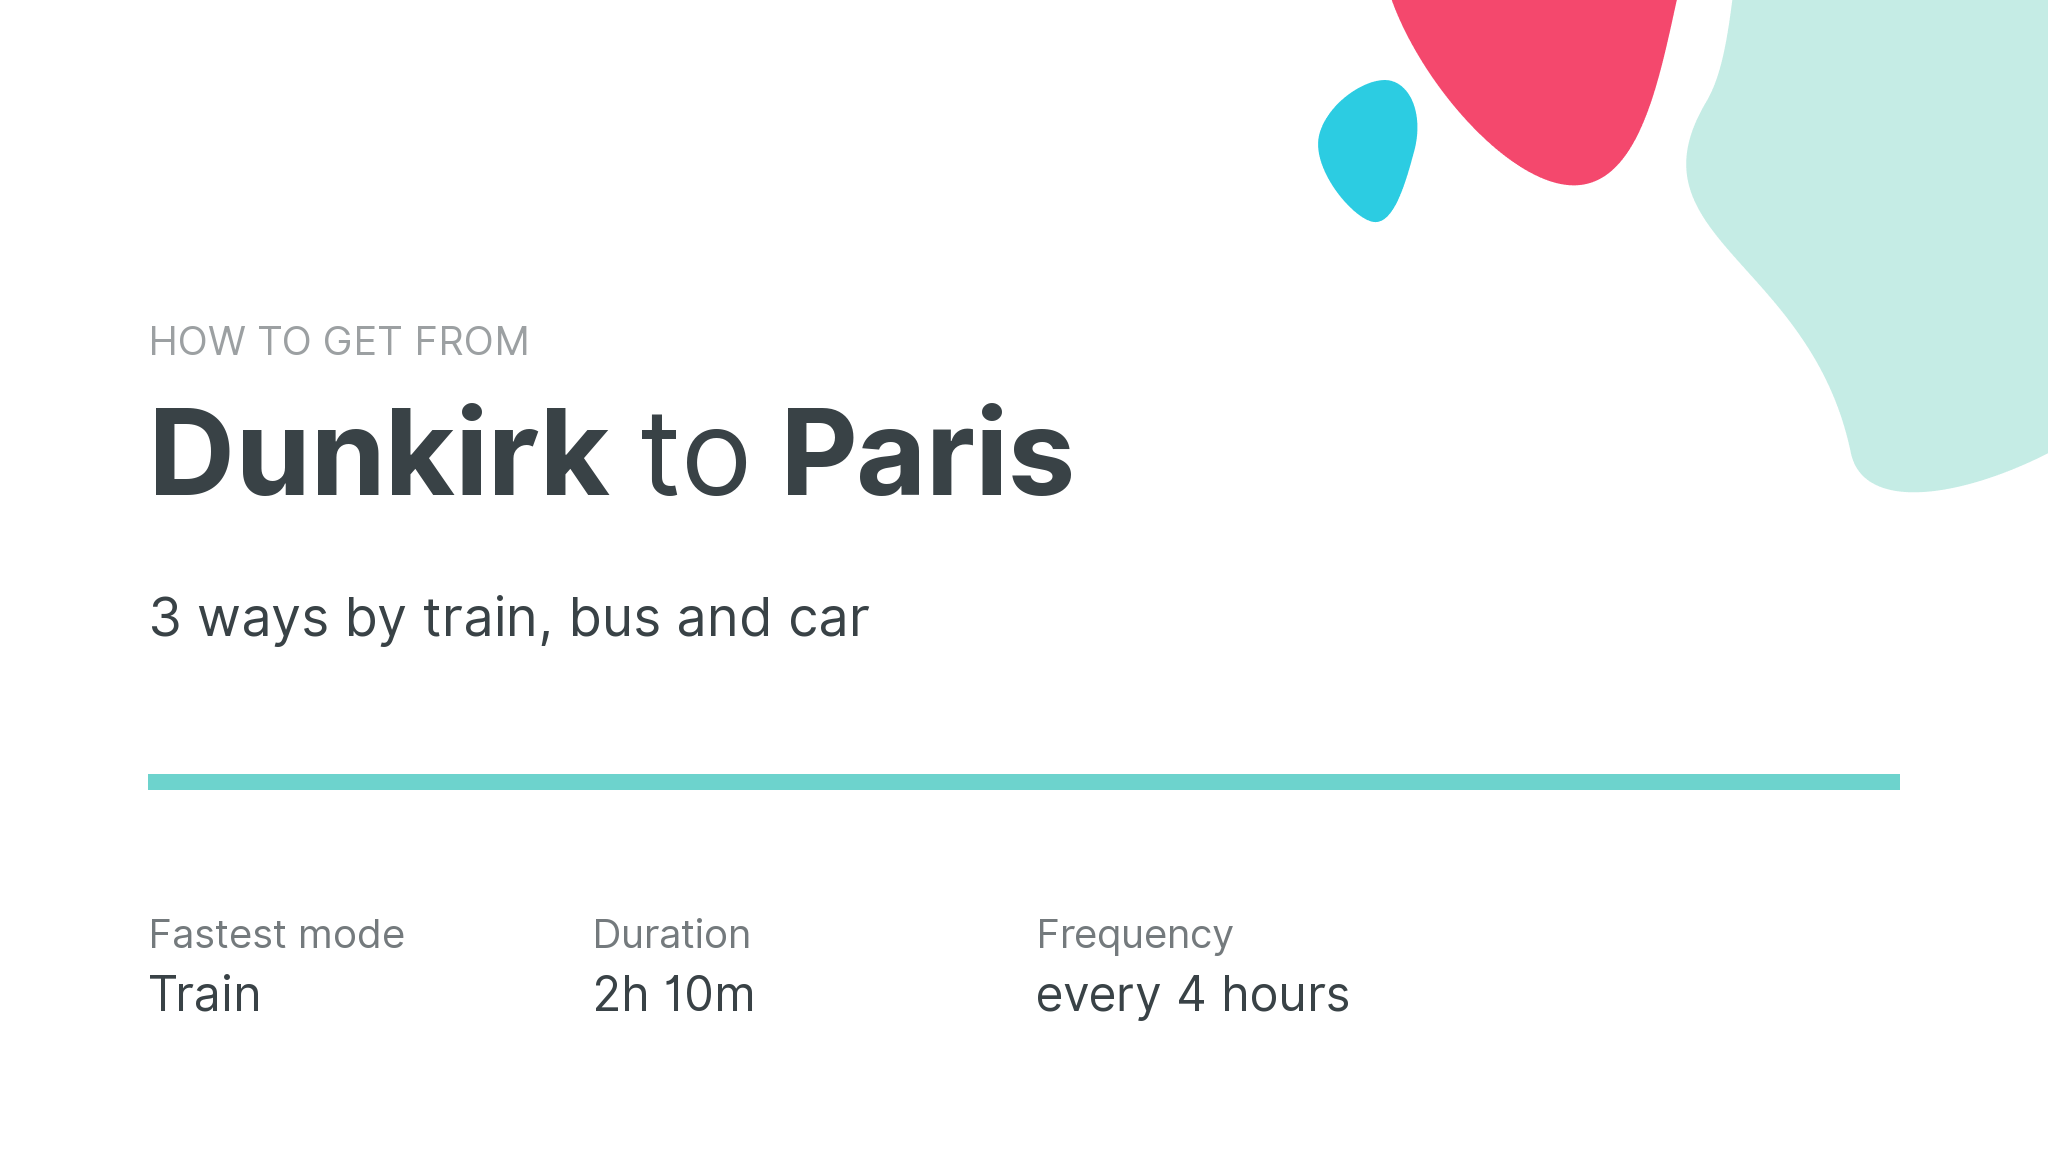 How do I get from Dunkirk to Paris